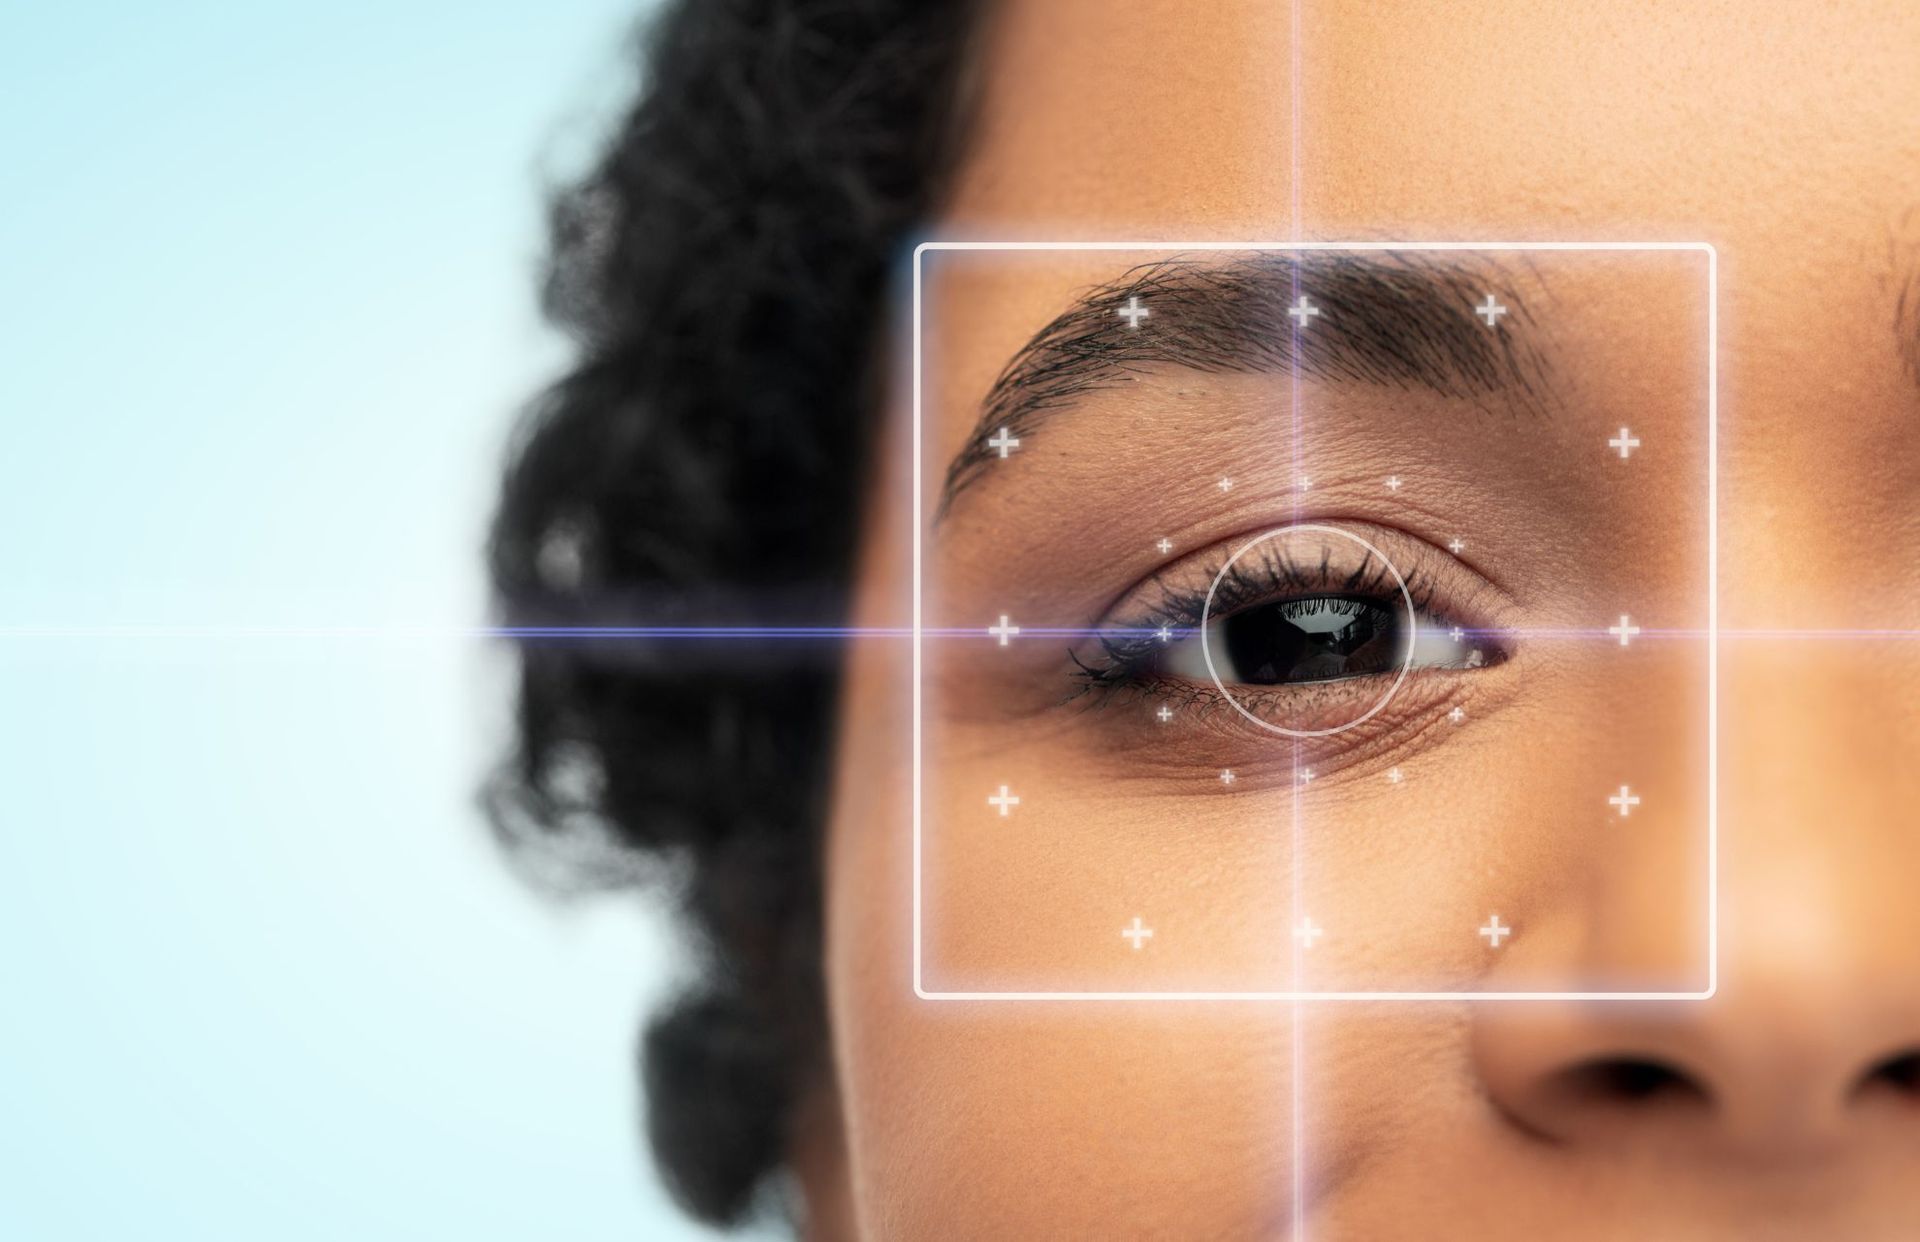 woman with laser target over eye, eye surgery concept - Laurel MD Washington DC area